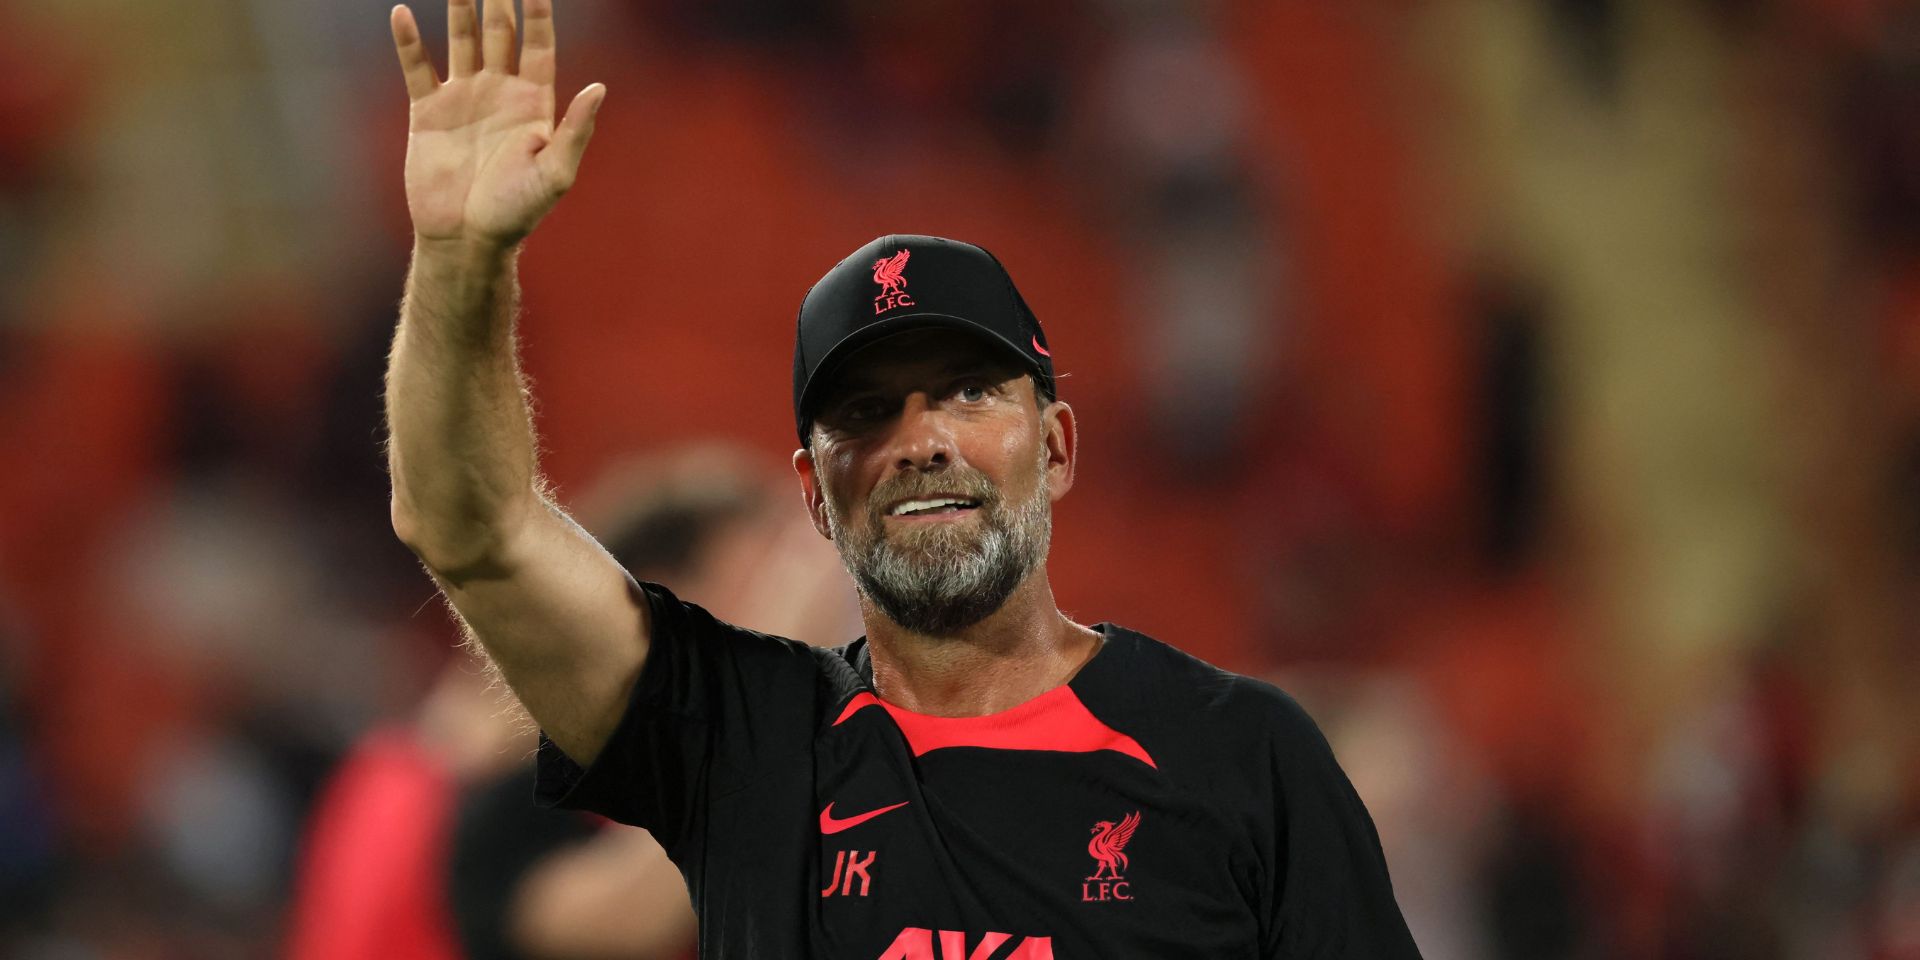 Jurgen Klopp to join Steven Gerrard and Sir Kenny Dalglish in being awarded the freedom of the city of Liverpool